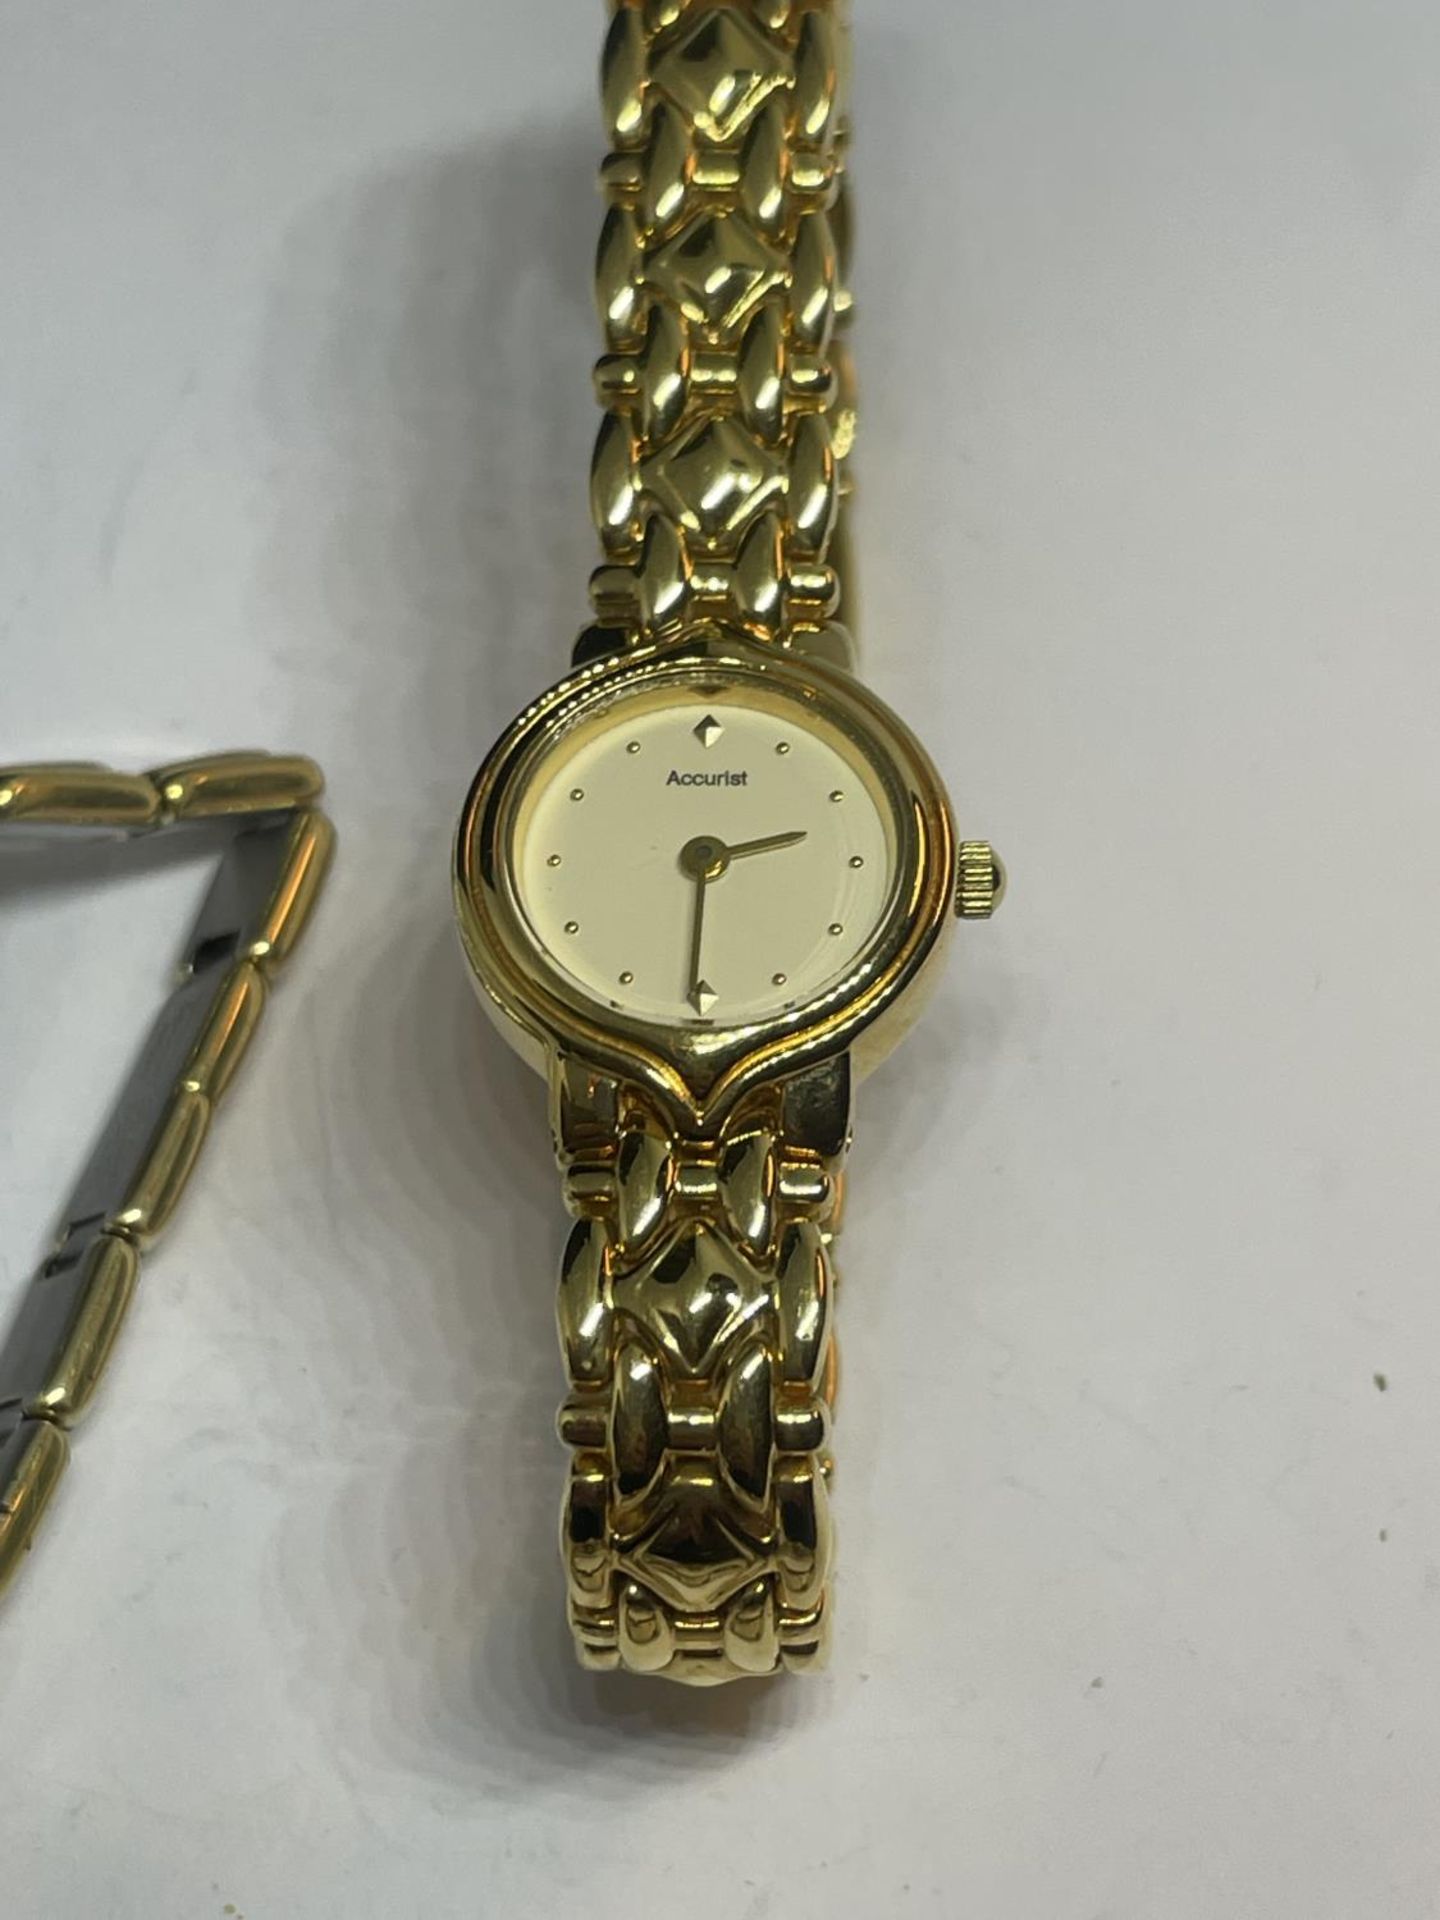 THREE WRIST WATCHES SEEN WORKING BUT NO WARRANTY - Image 2 of 4